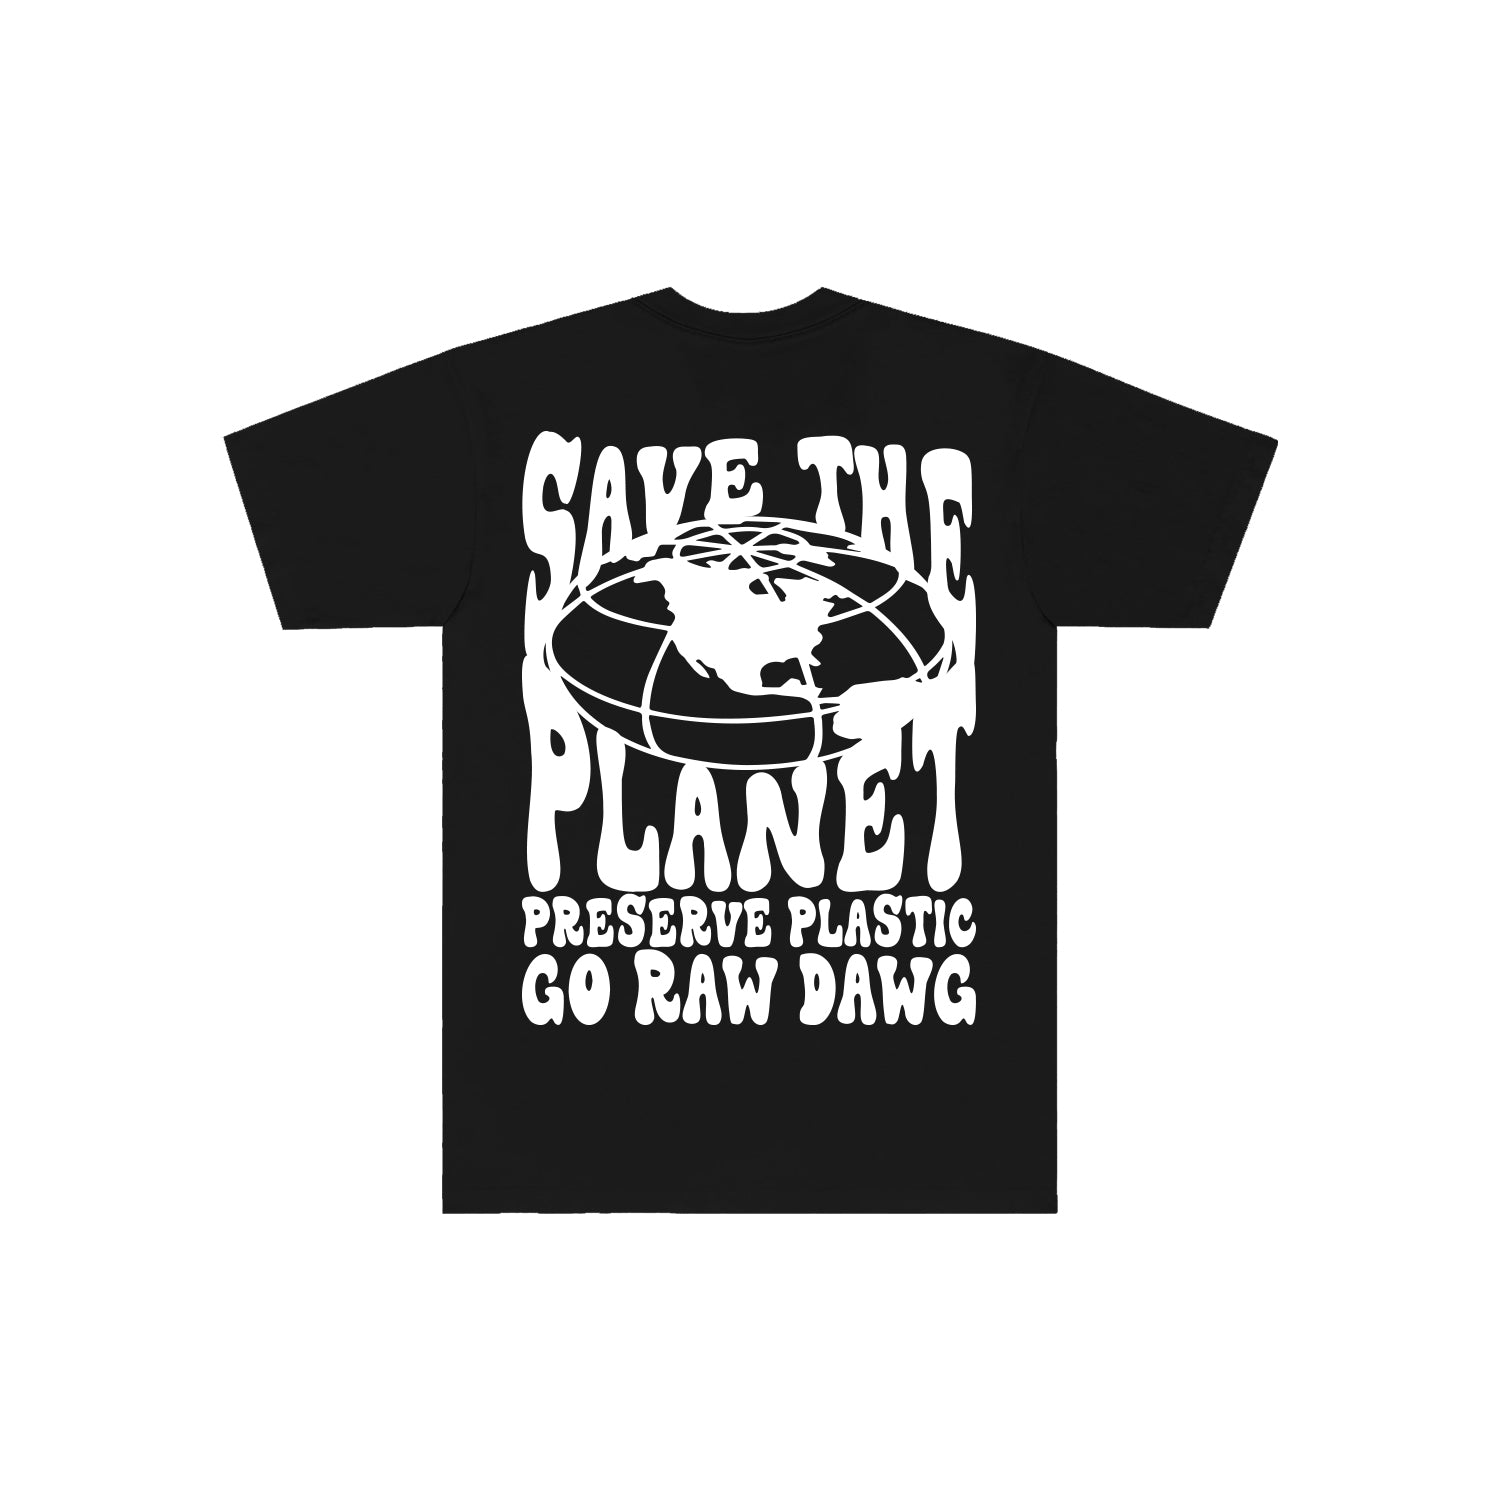 Save The Planet Tee - Black